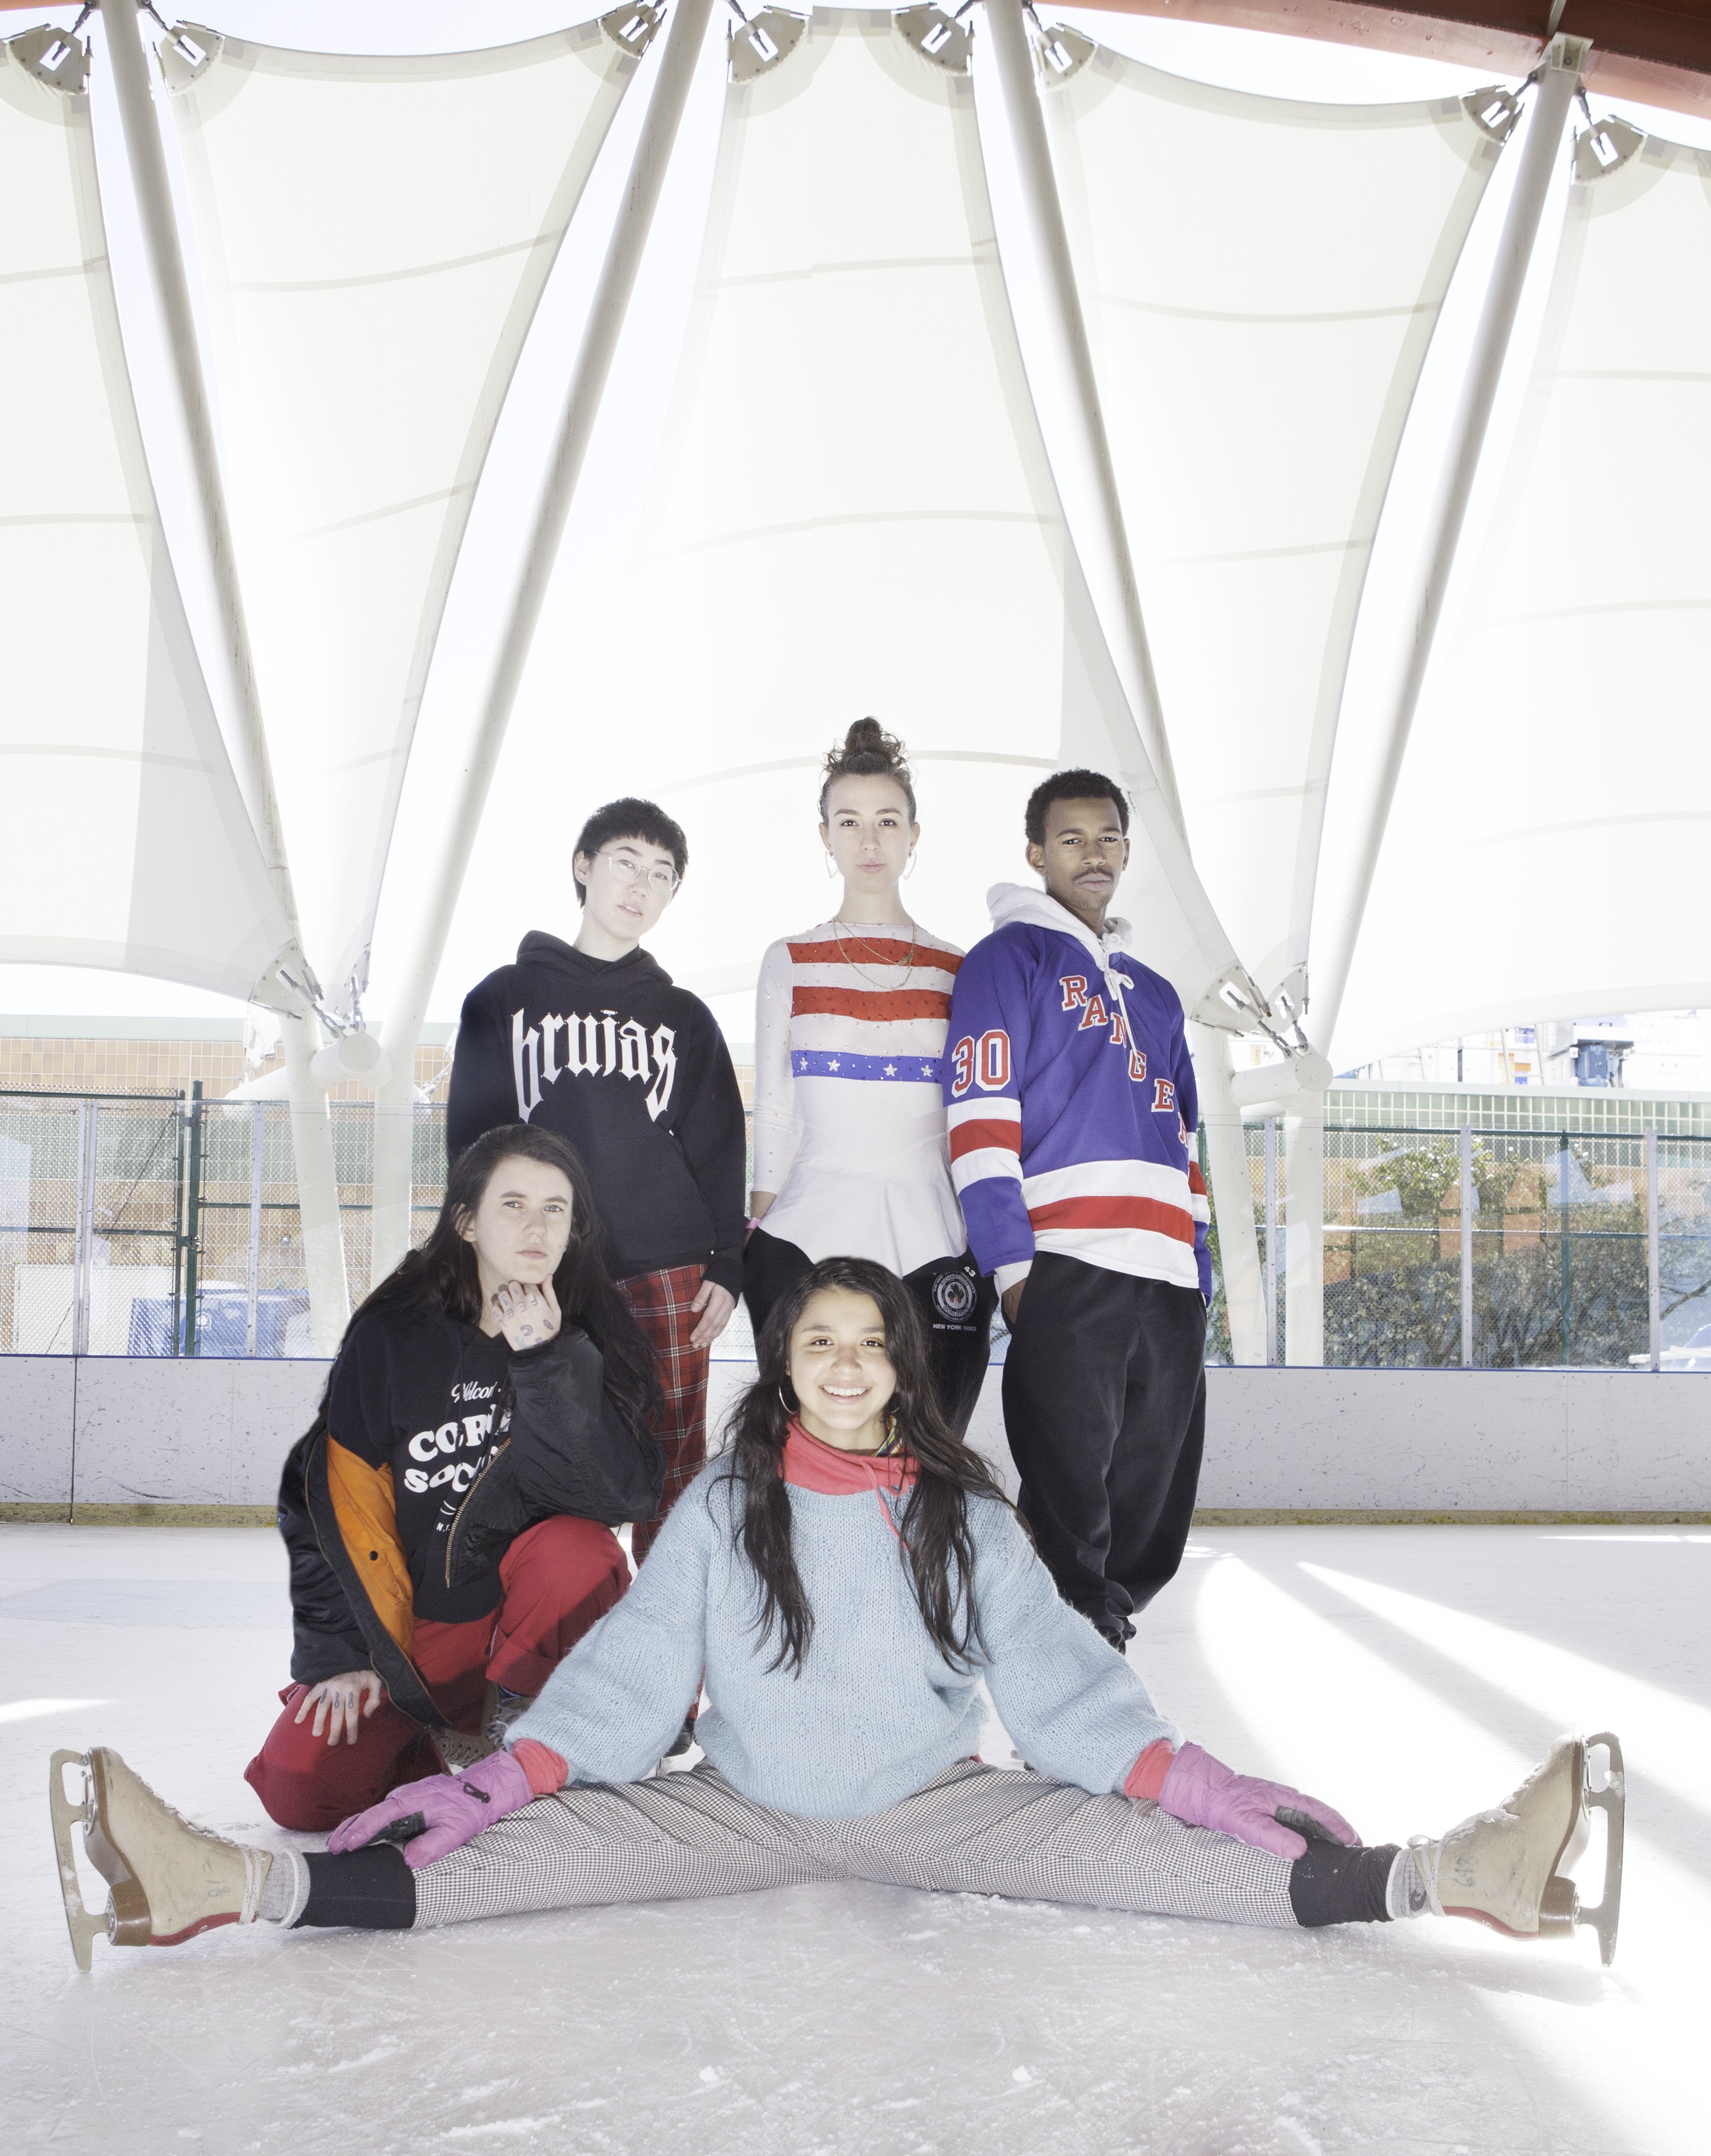 Members of Brujas (clockwise from left: Ripley Soprano, Sarah Snider, Arianna Gil, Taj Williams and Antonia Perez) at Riverbank State Park Ice Rink in New York. 